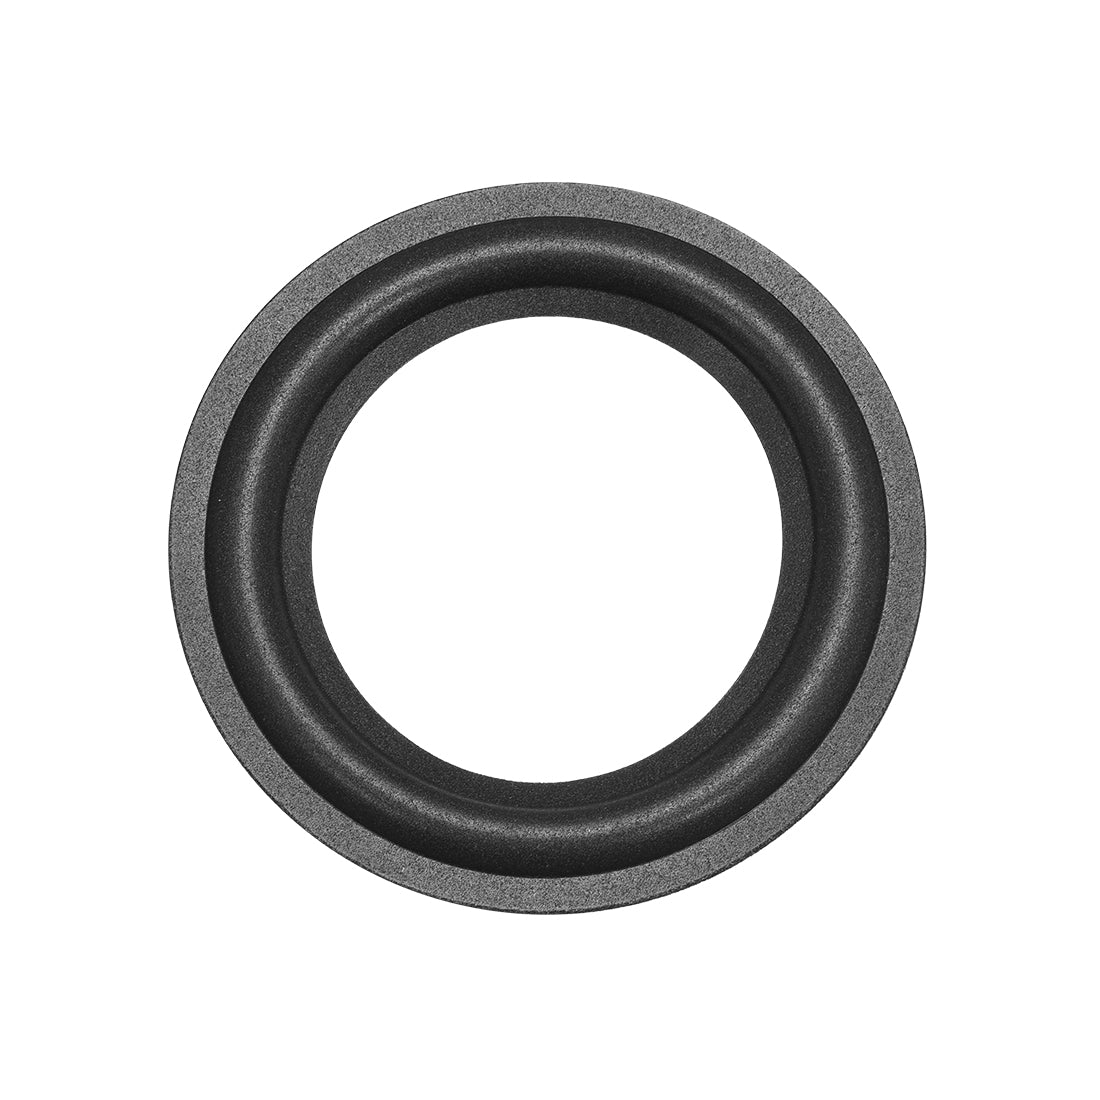 uxcell Uxcell 4.5" 4.5 inch Speaker Foam Edge Surround Rings Replacement for Speaker Repair or DIY